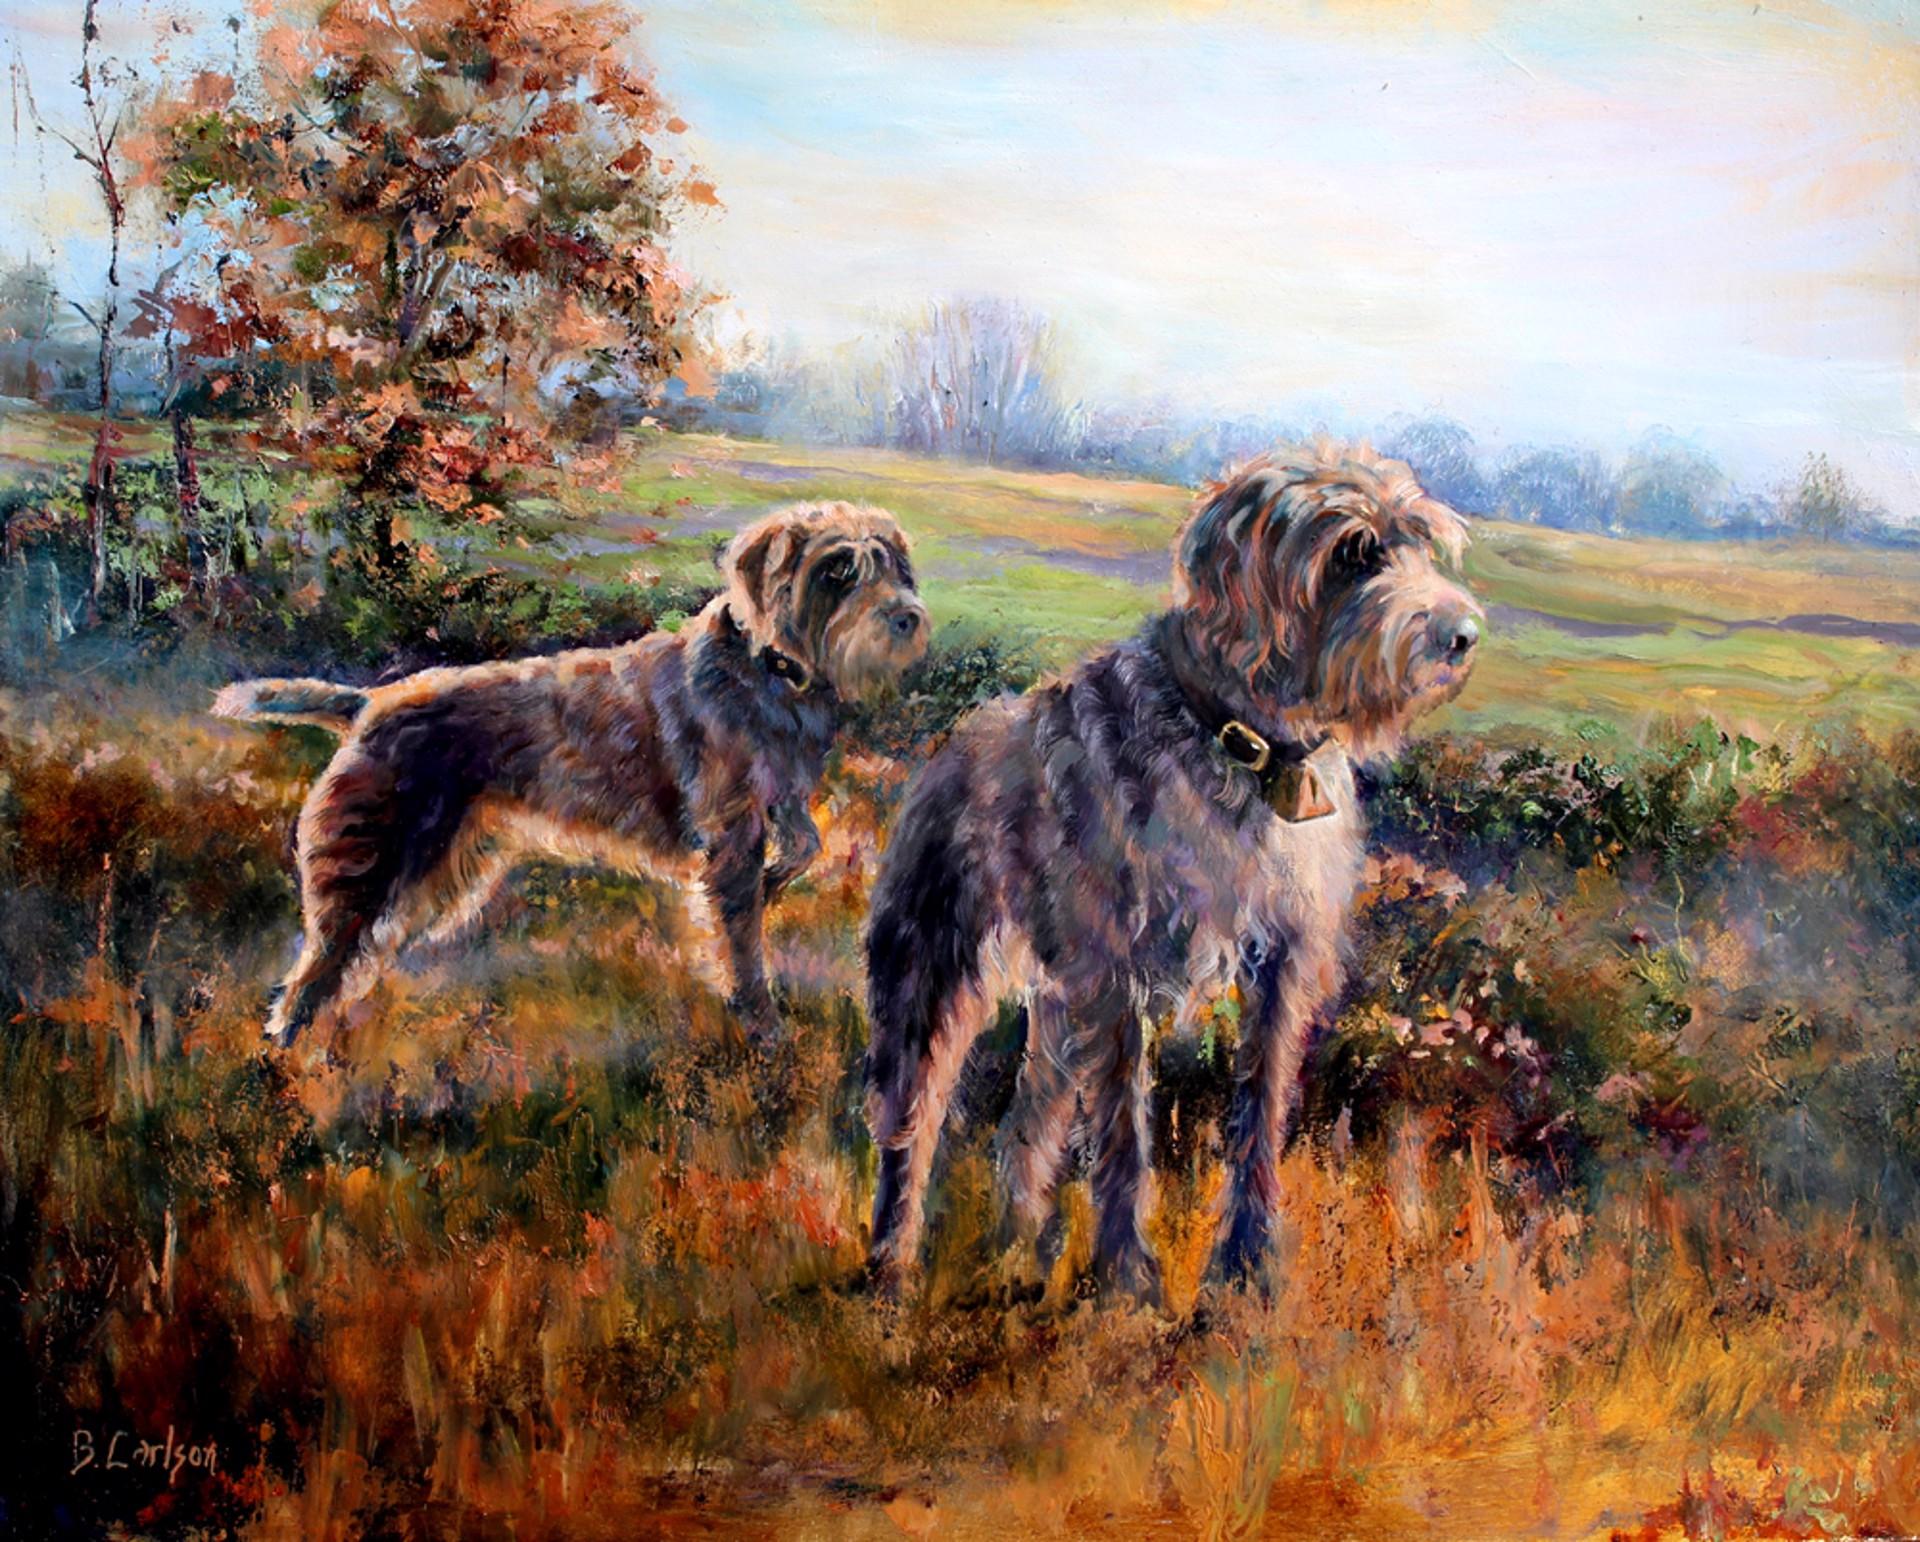  Beth Carlson oil sporting landscape of Wirehair Pointers ready to hunt,  framed